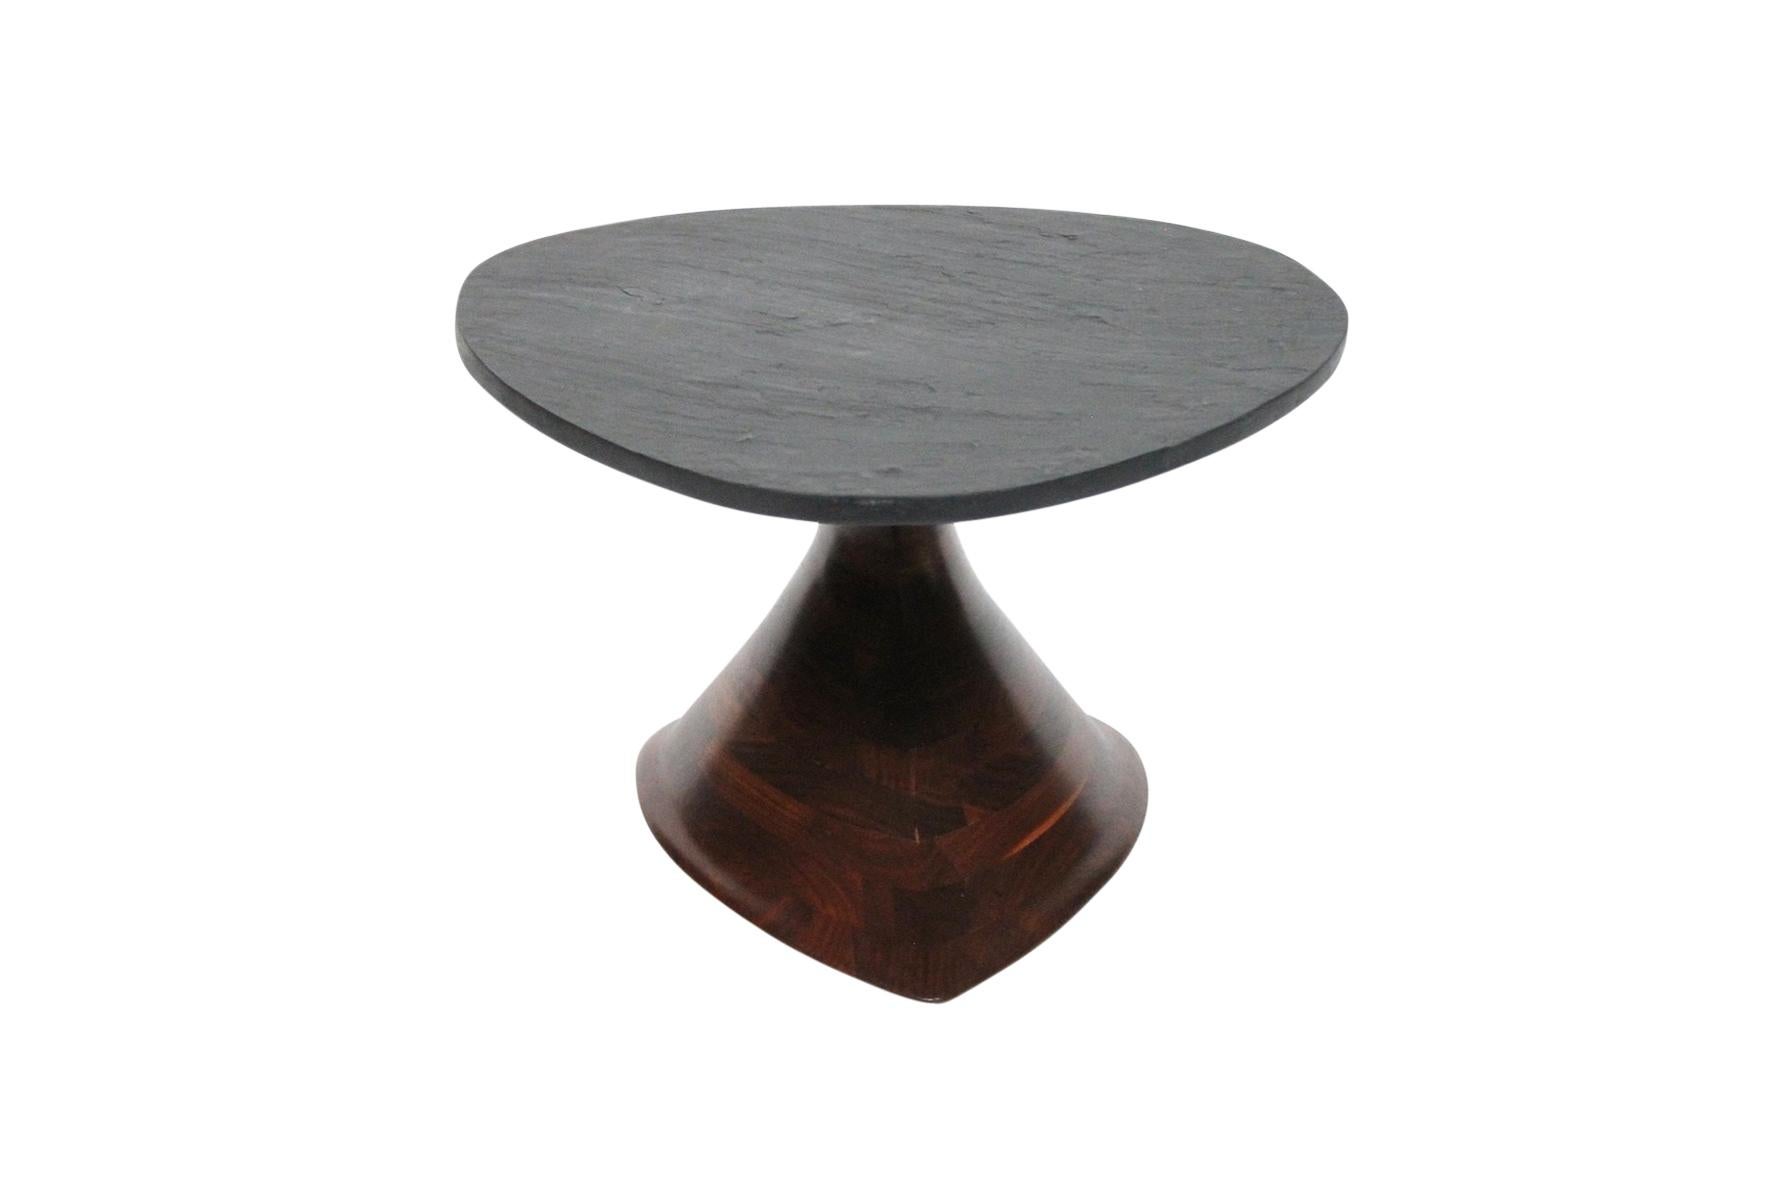 Rare slate-topped coffee table with stack laminated walnut base from the studio of noted American Craftsman Phil Powell.